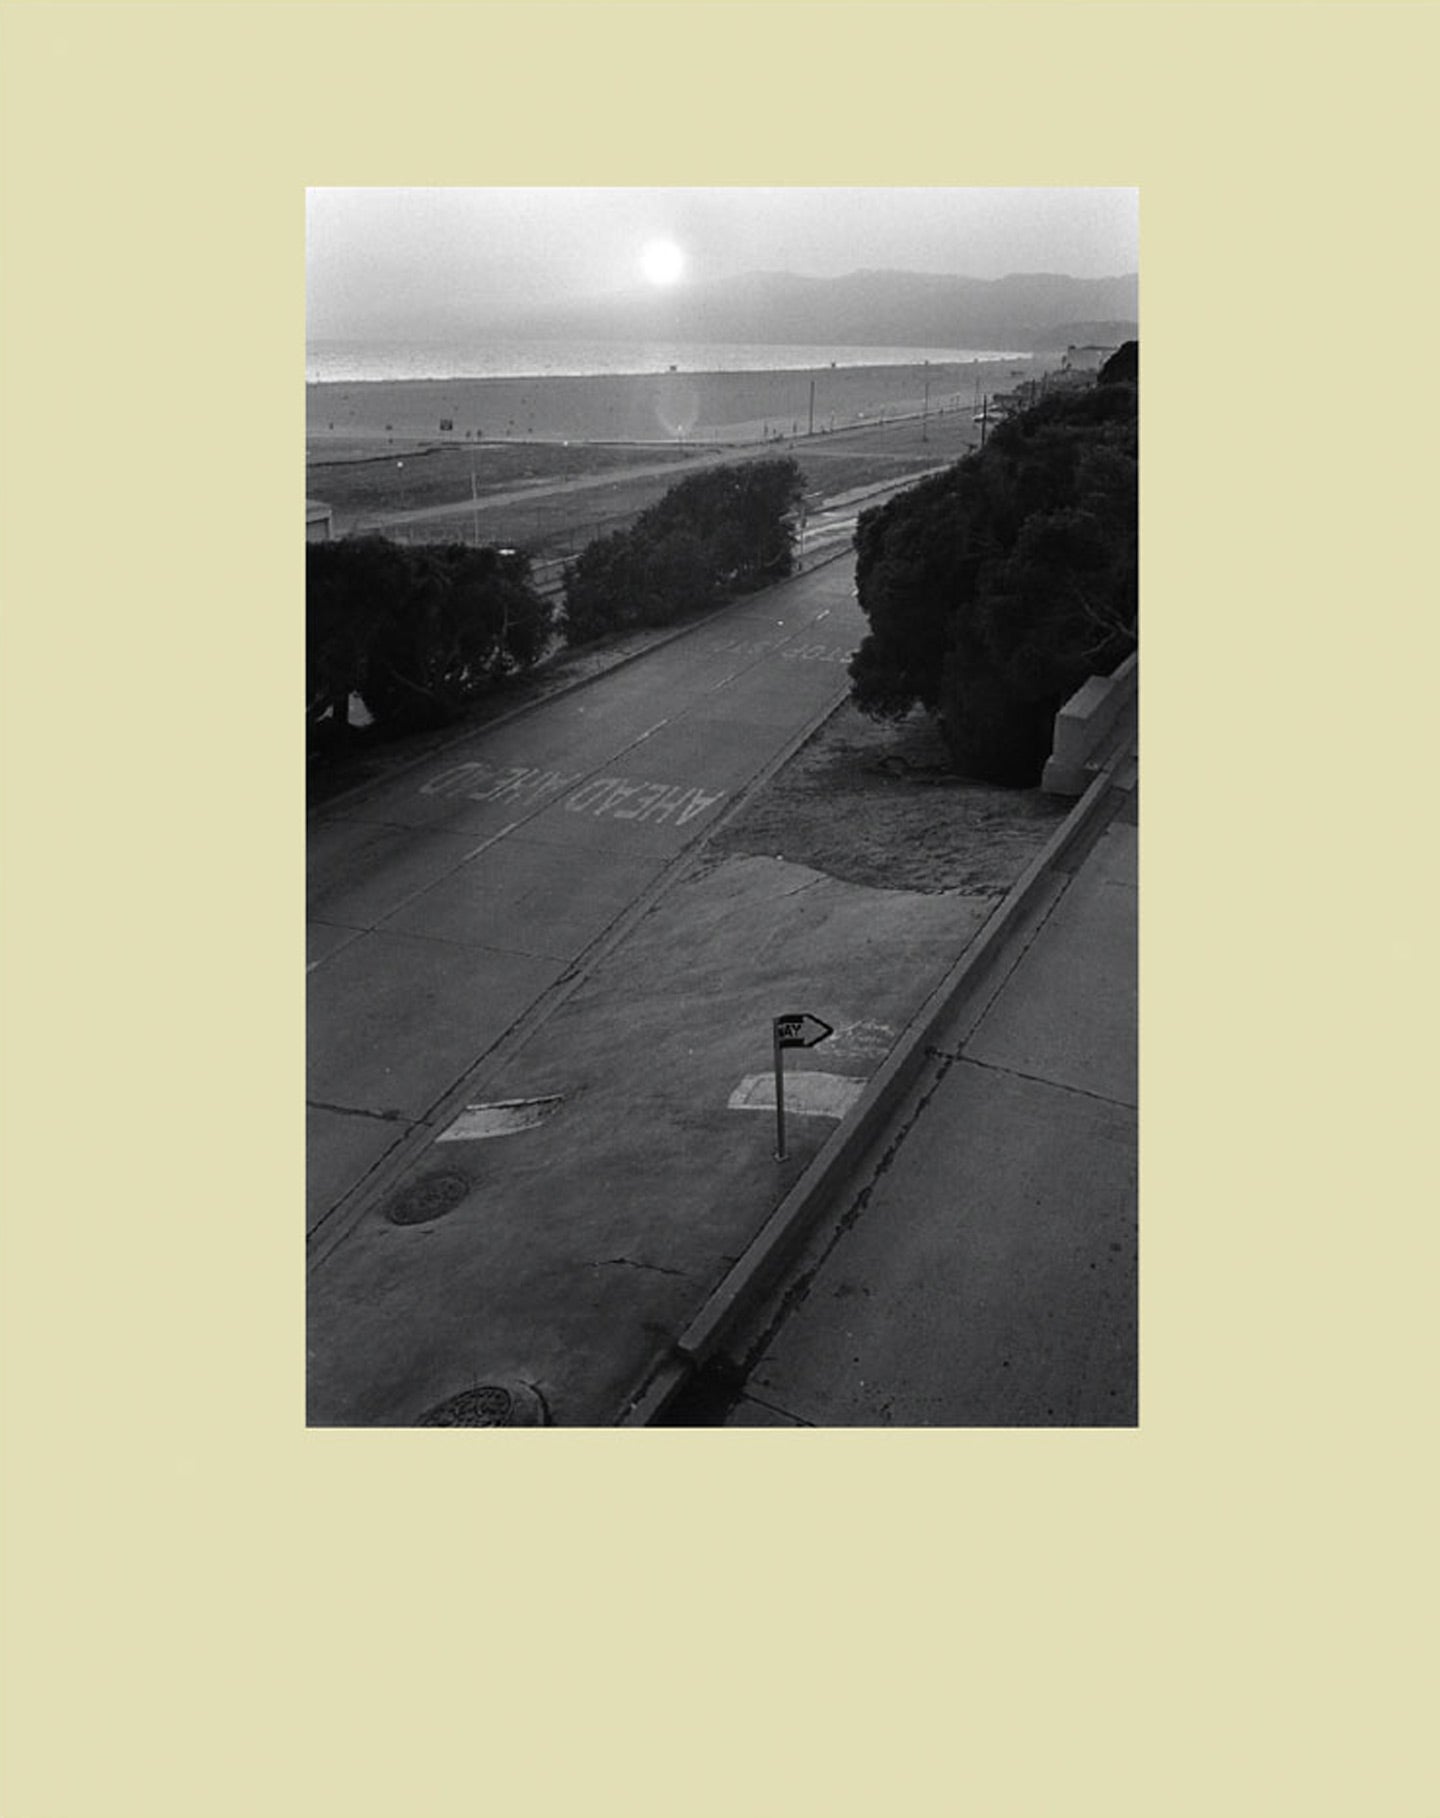 NZ Library #2: Mark Steinmetz: Angel City West: Volume One (1), Special Limited Edition (with Print) (NZ Library - Set Two, Volume Six) [SIGNED]